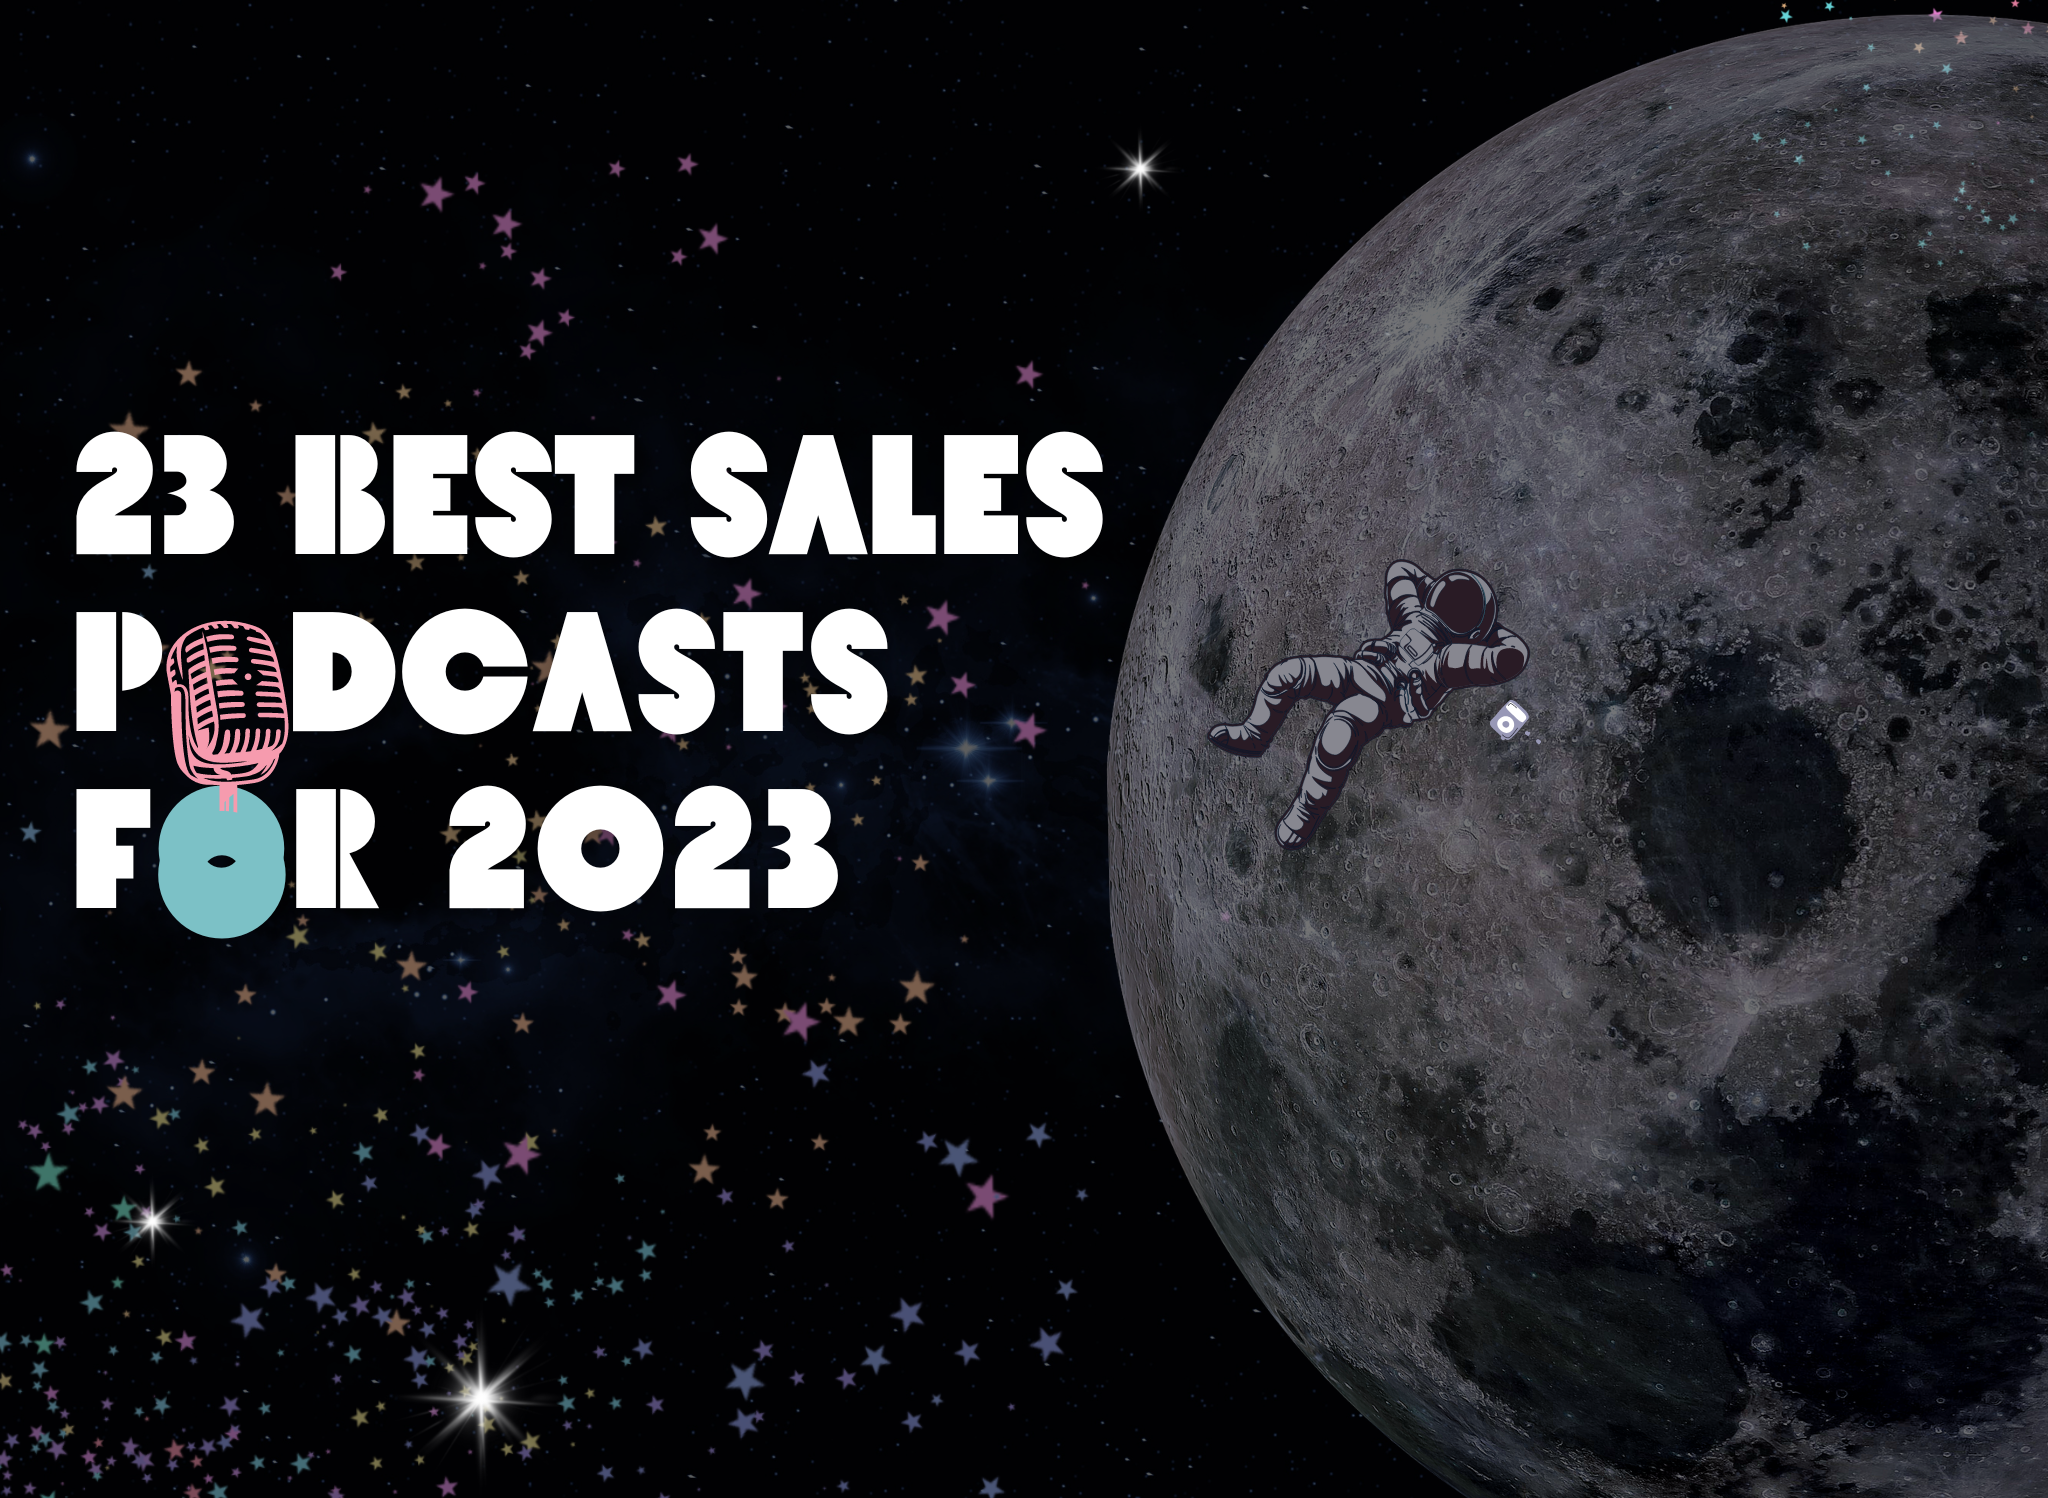 23 best sales podcasts to become a good salesperson.